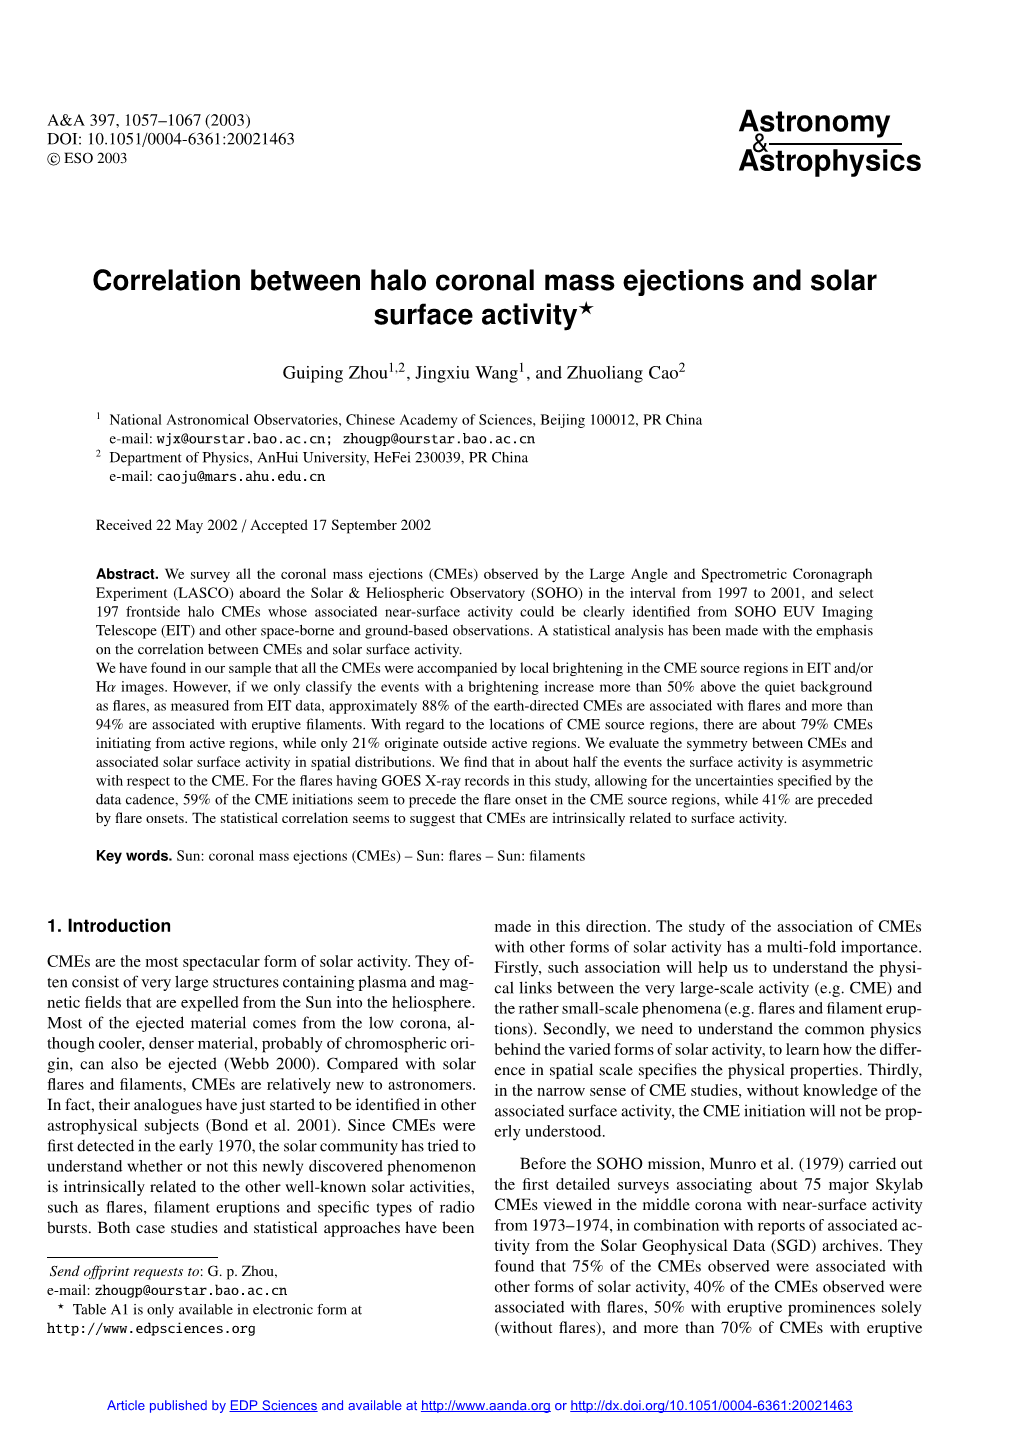 Correlation Between Halo Coronal Mass Ejections and Solar Surface Activity?